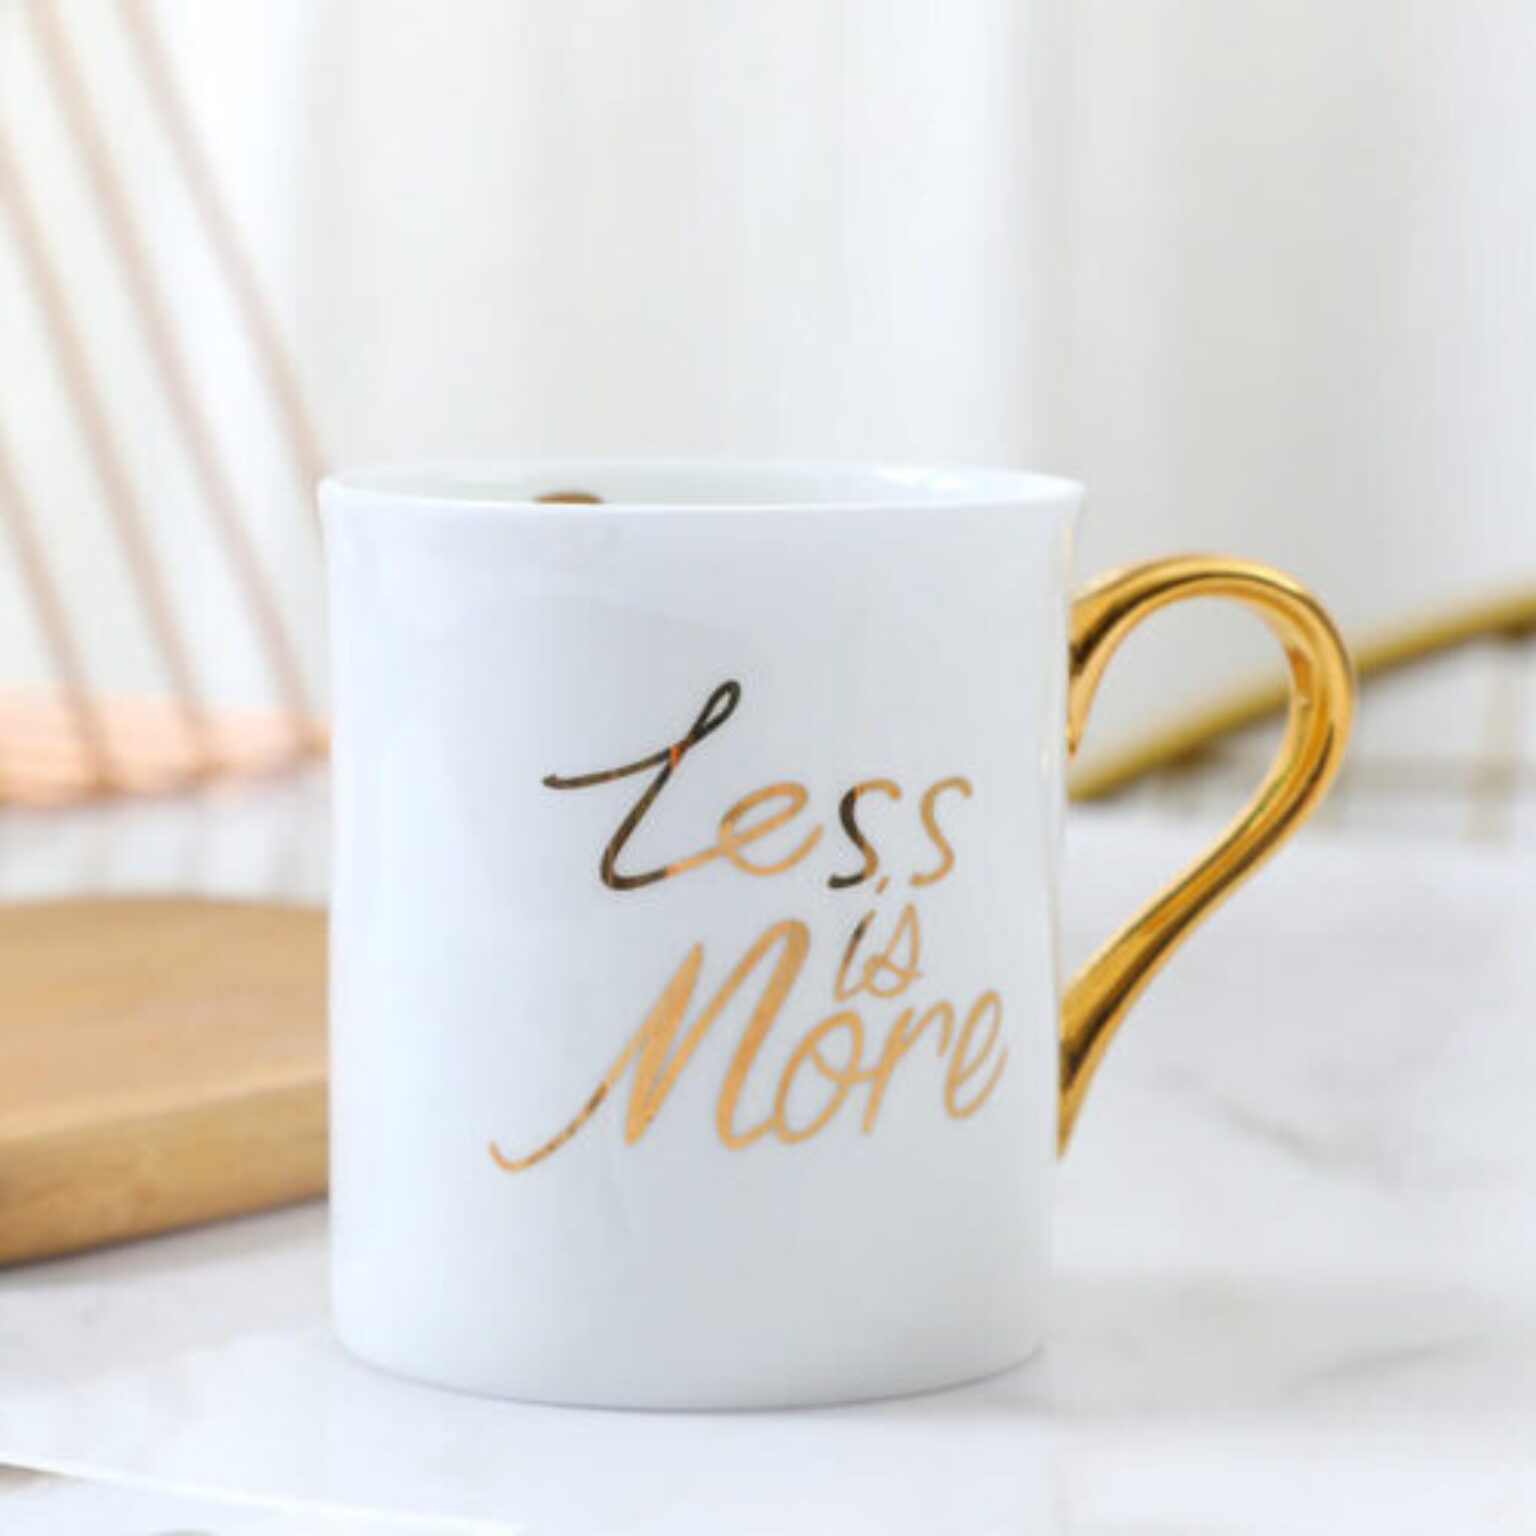 mug with great quality of decal in gold